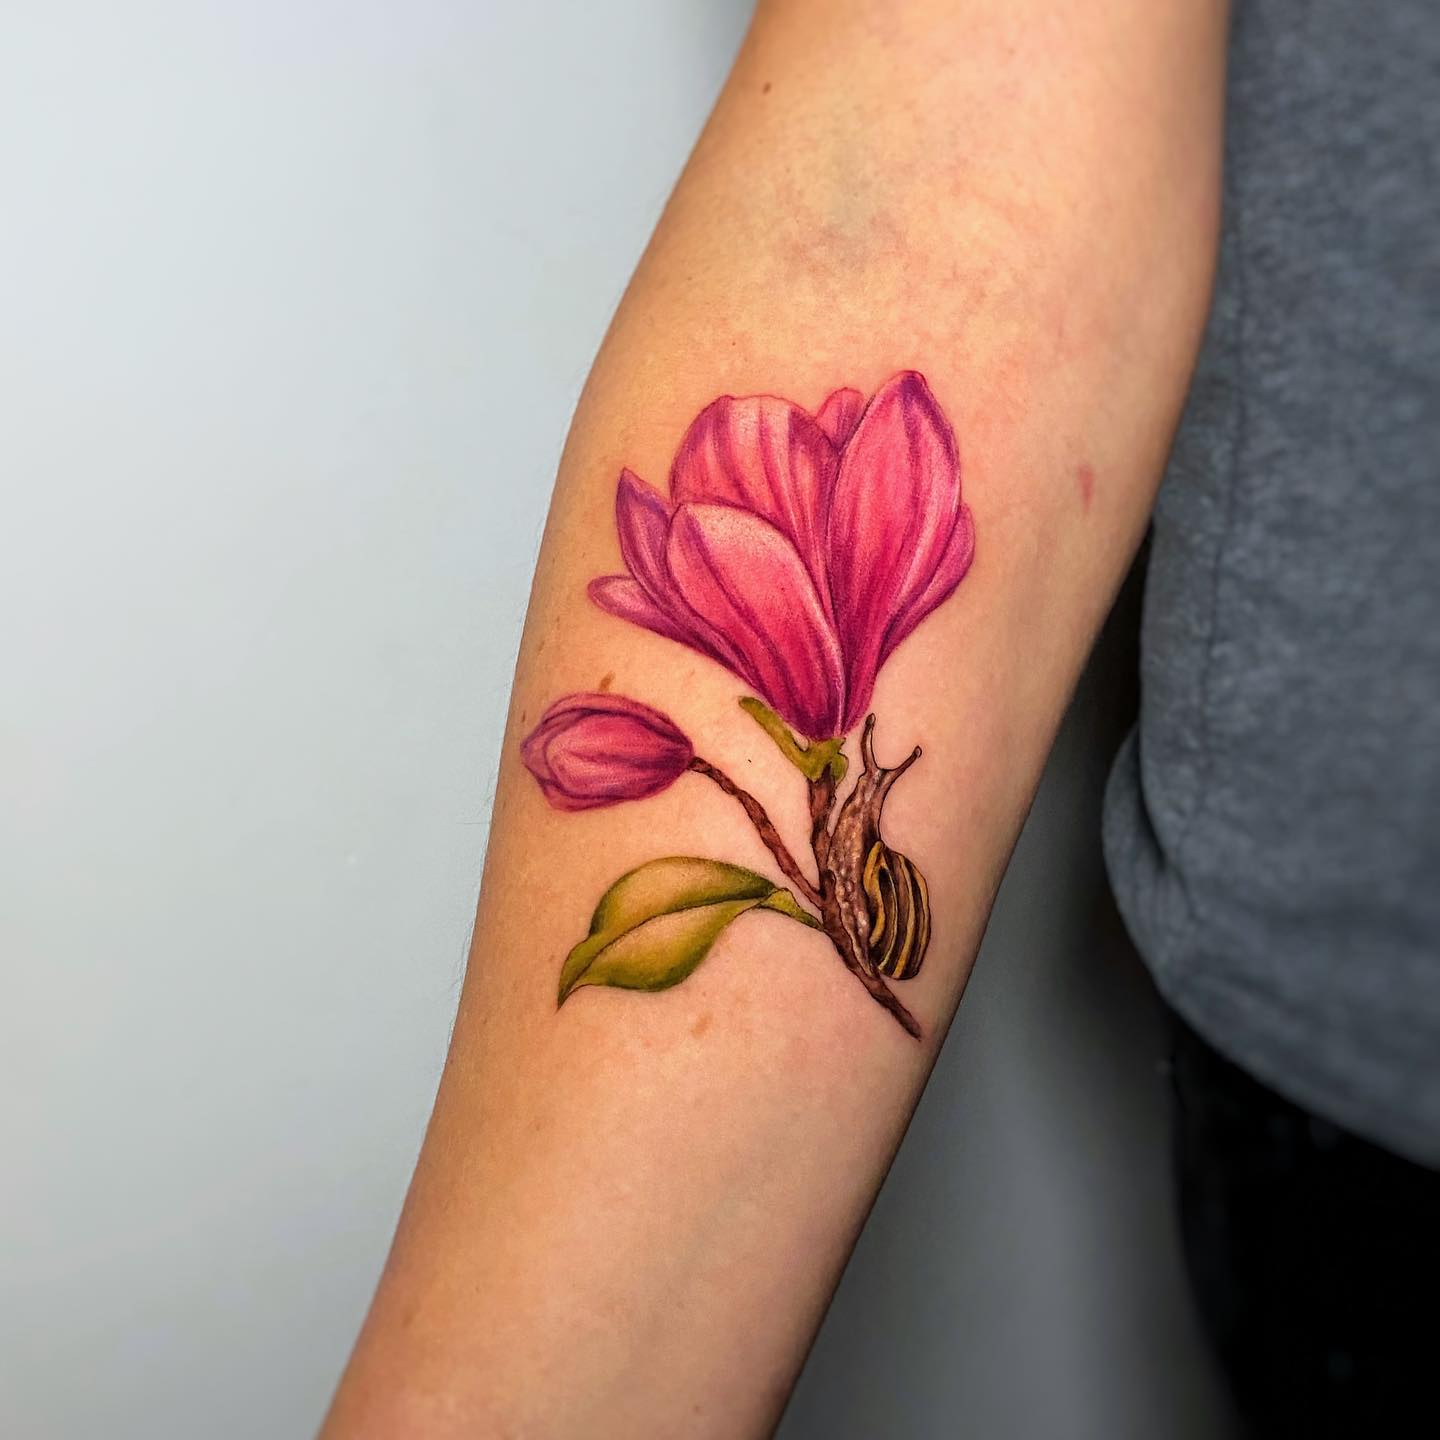 Being a symbol of hope, love and light, pink lily tattoos are just fabulous. Why don't you get a tattoo of it on your arm to feel its innocence and elegance?